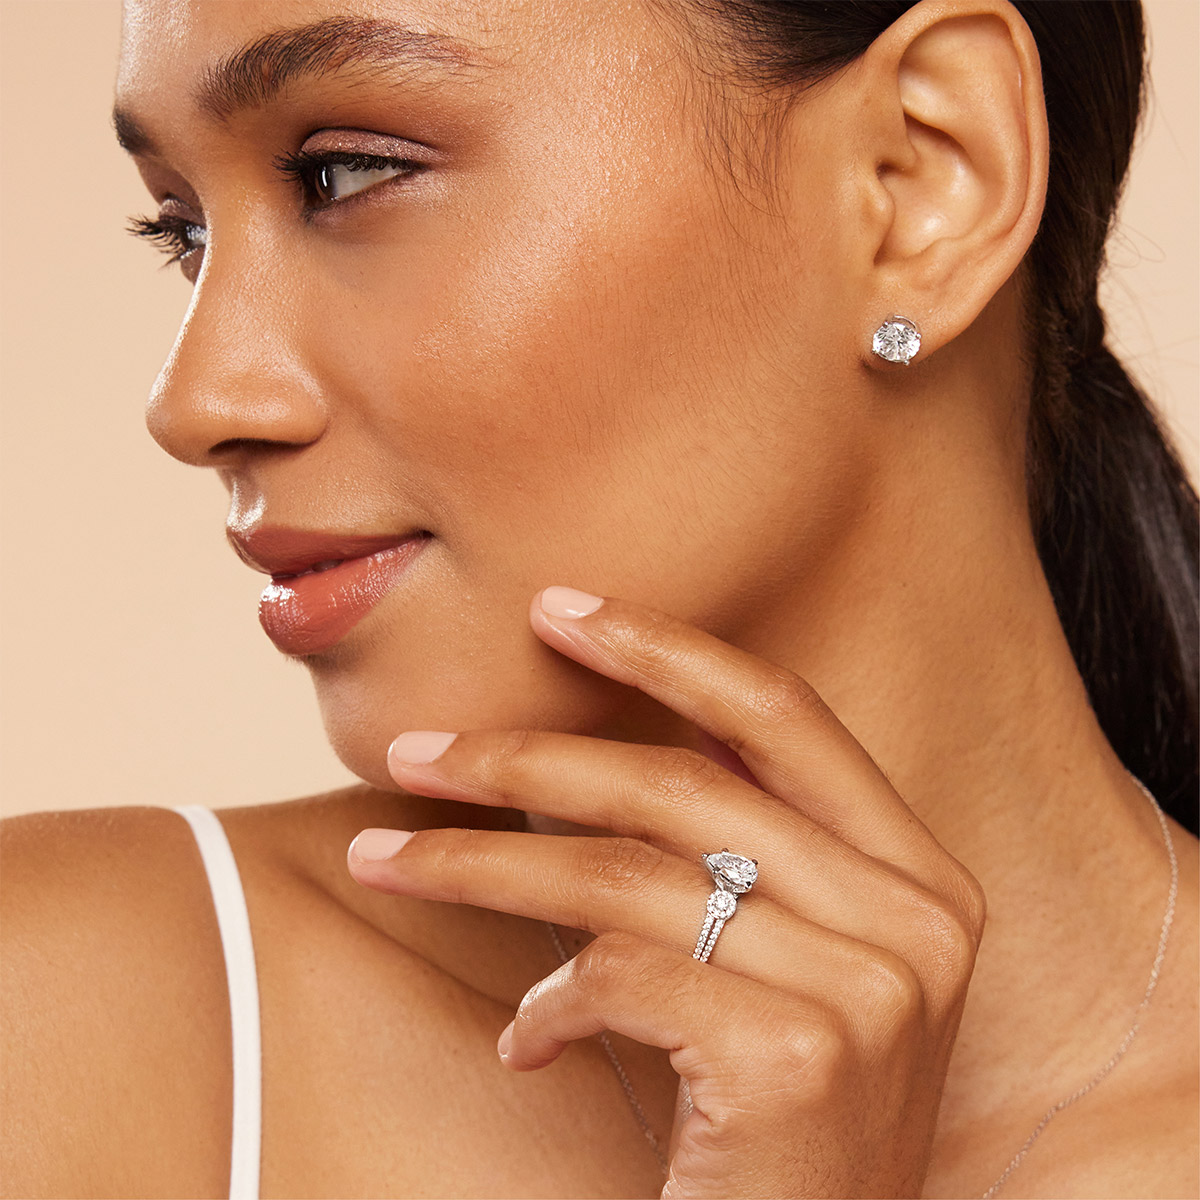 Stud Earrings – With Clarity